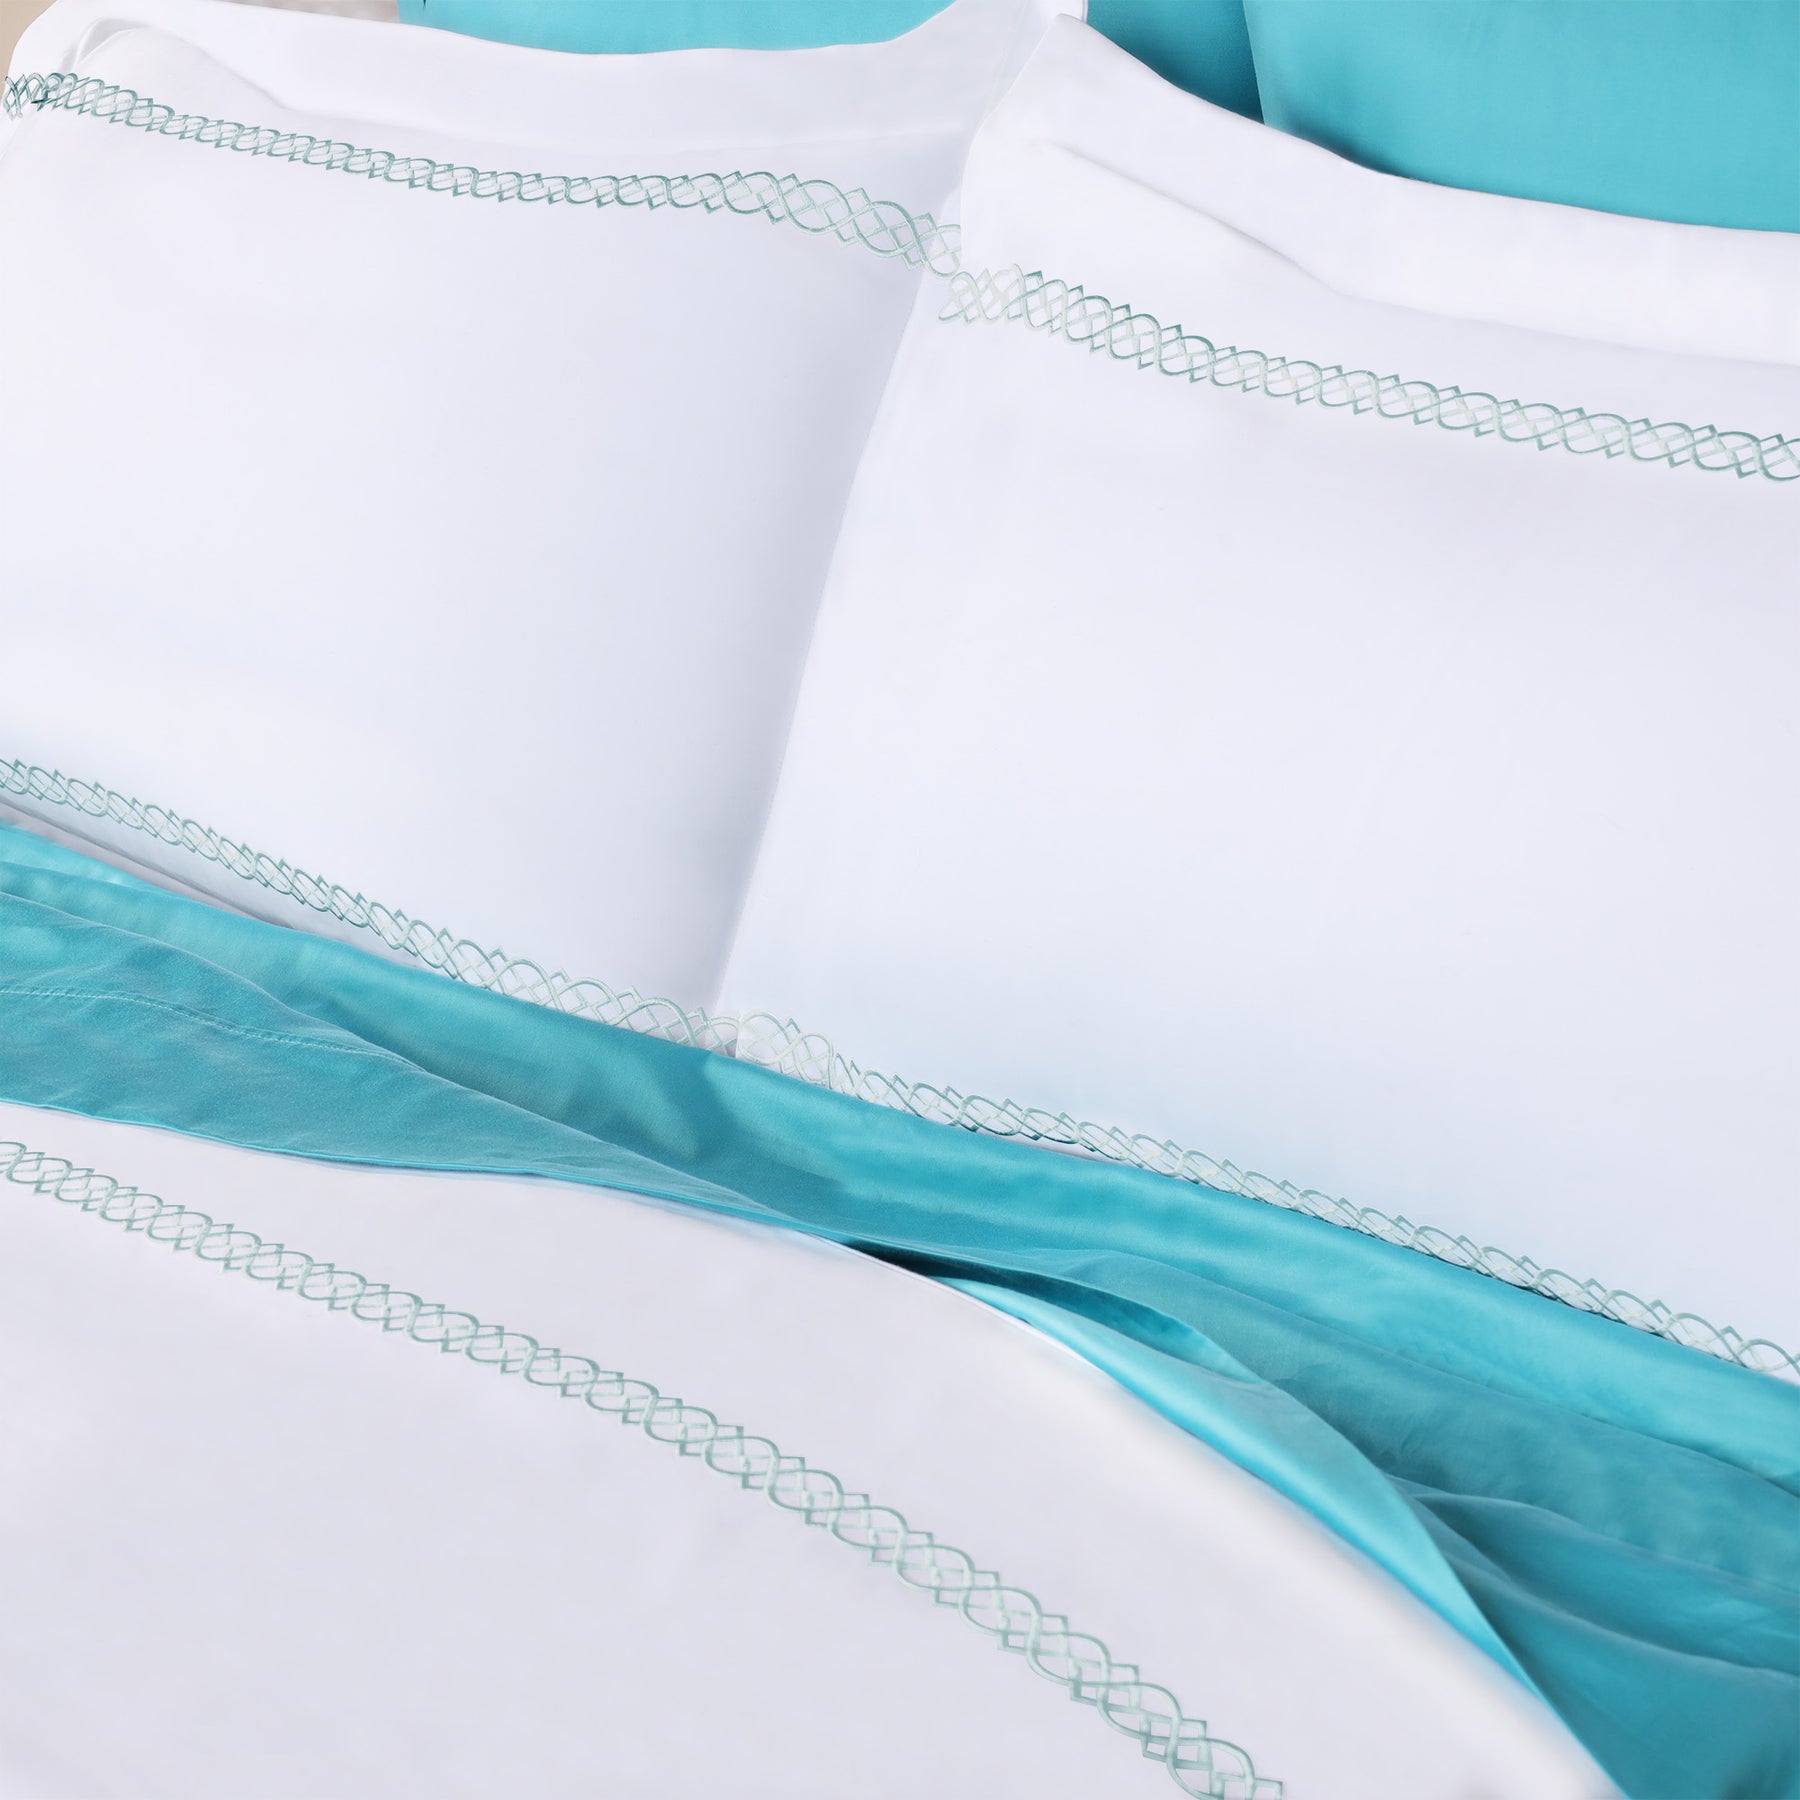 1000 Thread Count Egyptian Cotton Embroidered Duvet Cover Set - White/Blue